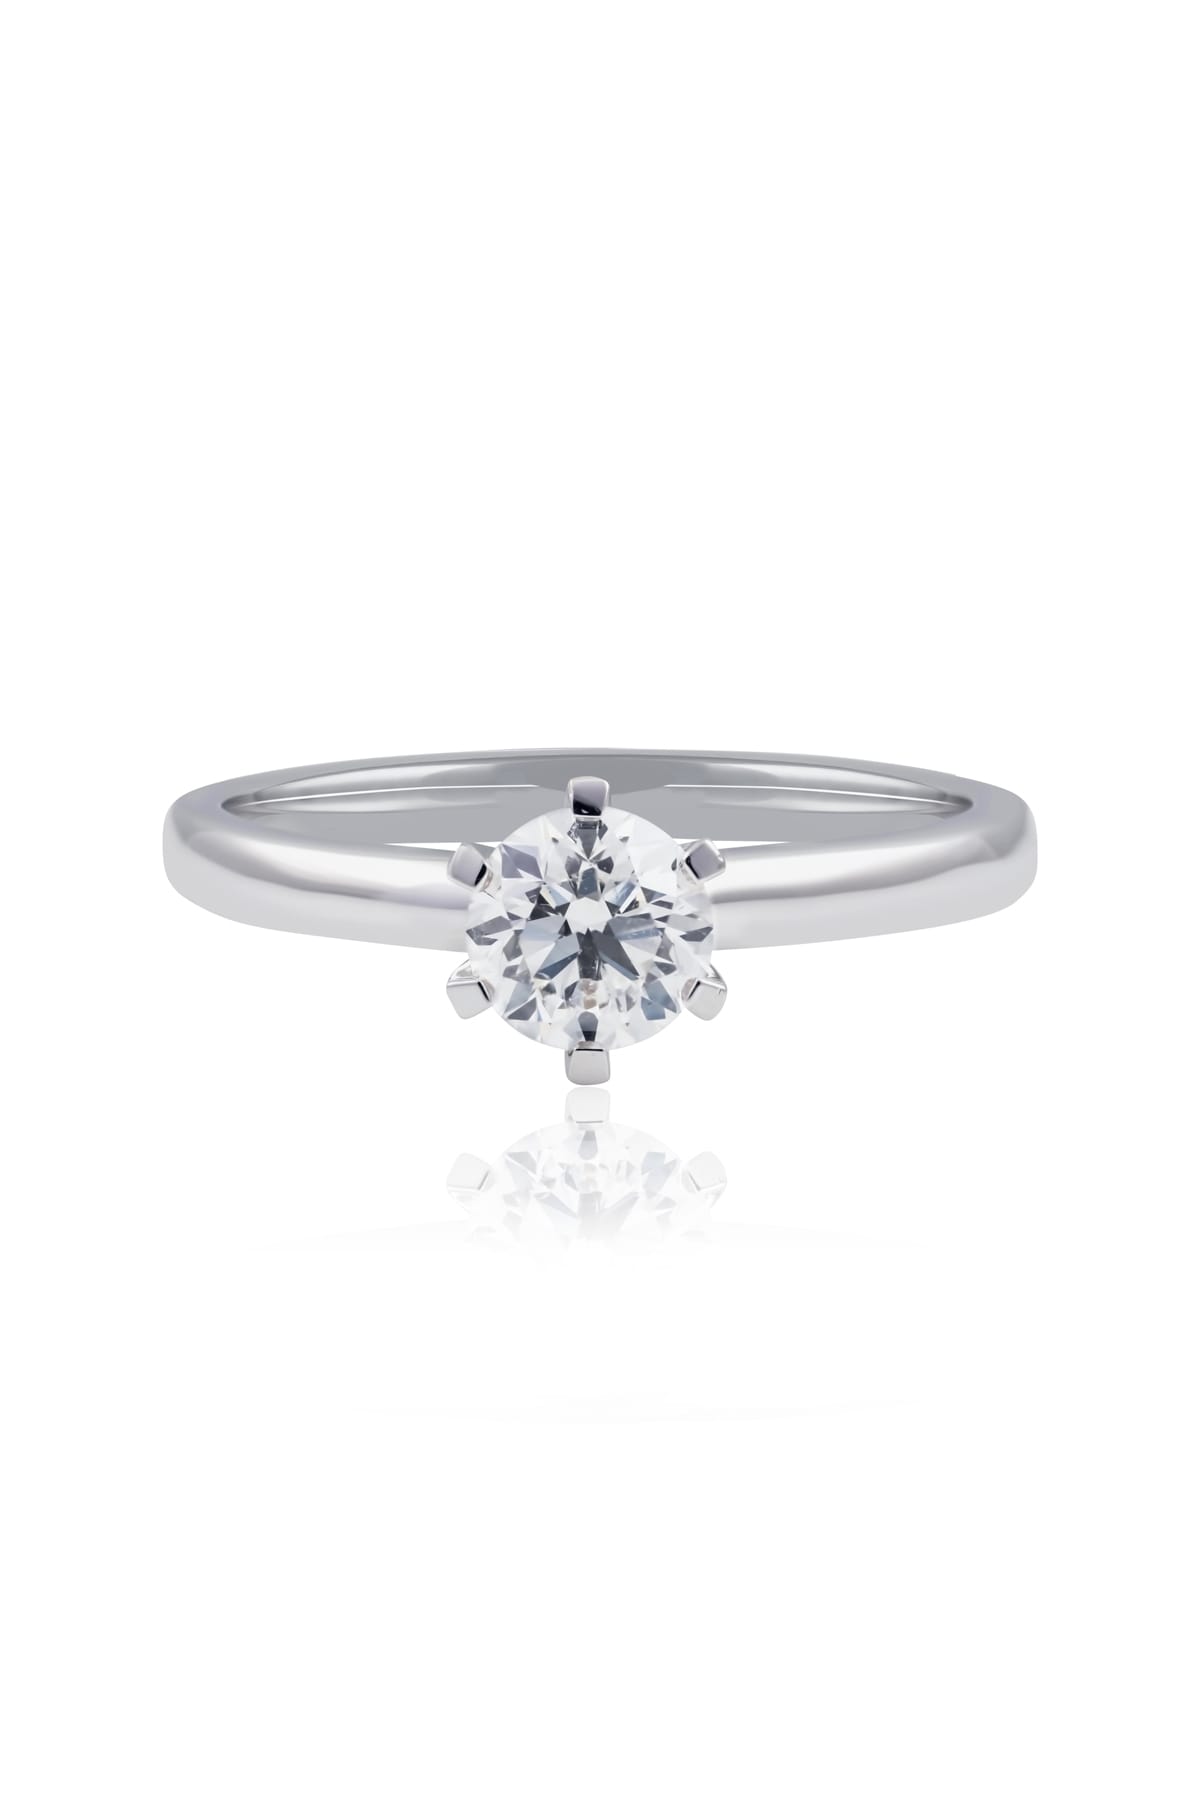 0.70ct Diamond Solitaire Engagement Ring With White Gold Band from LeGassick